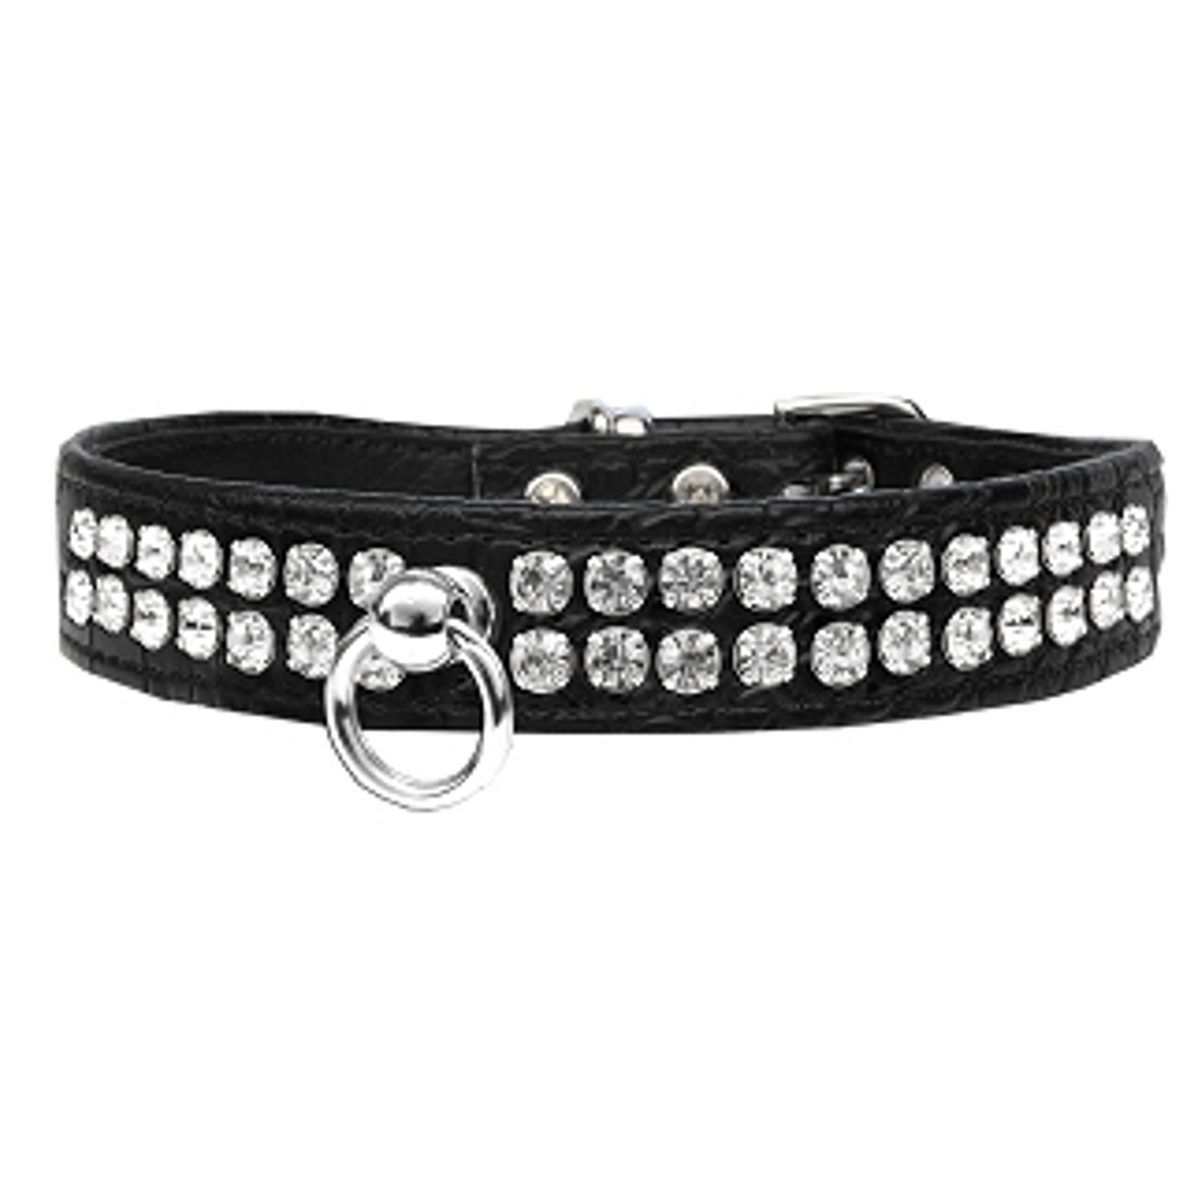 Dazzle 2-row Crystal Faux Croc Dog Collar - Black - 3 Red Rovers